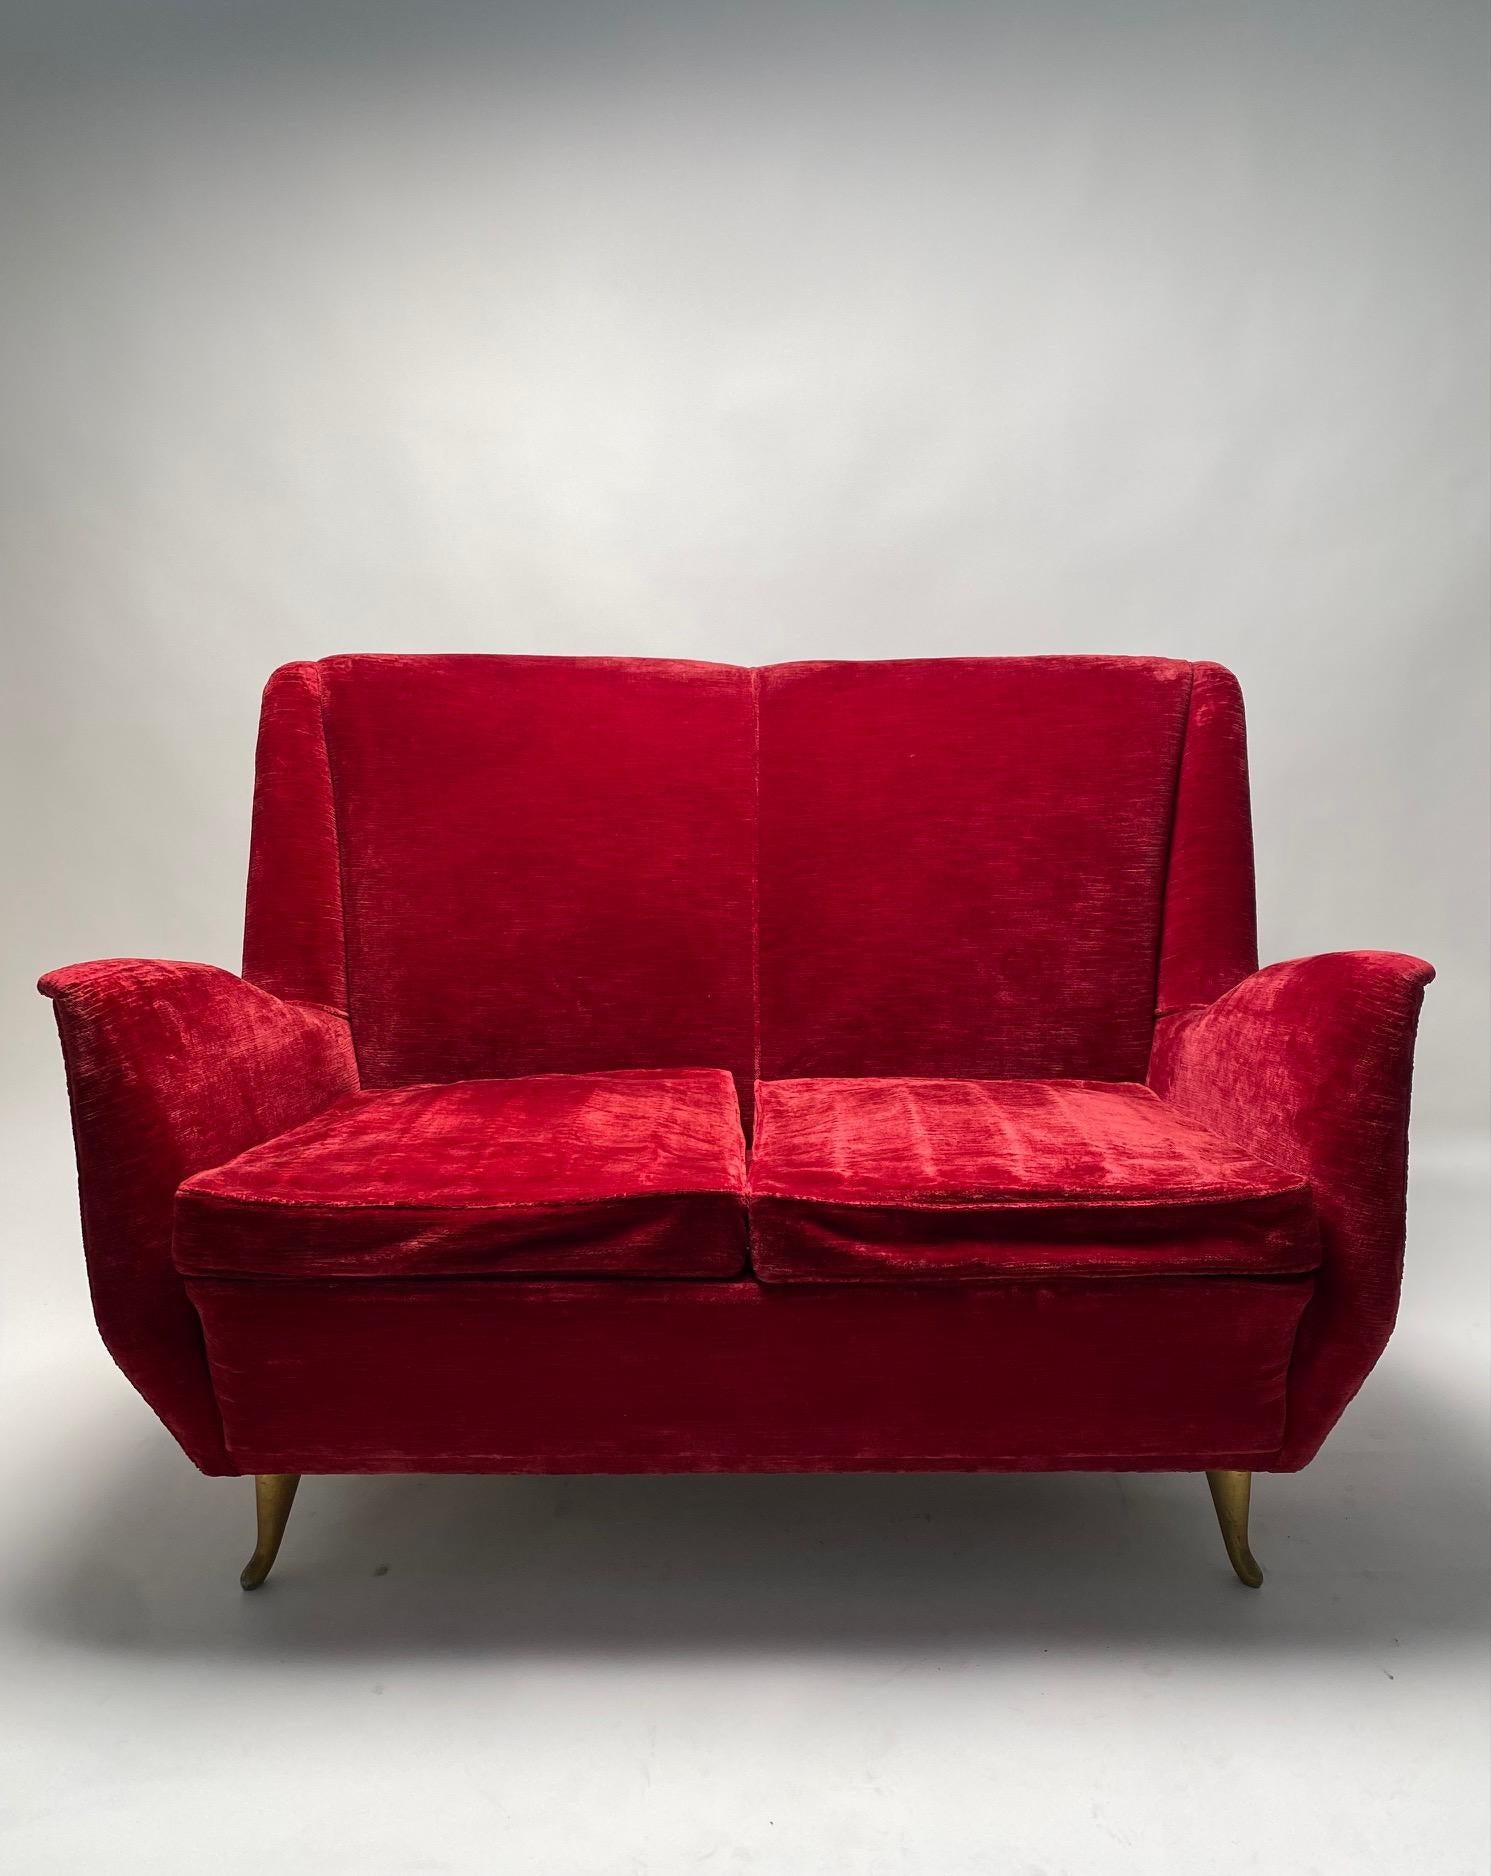 Italian two-seater red sofa, produced by I.S.A. Bergamo, Att. Gio Ponti.

Rare and elegant 1950s Italian sofa produced by I.S.A. of Bergamo, a company for which Gio Ponti worked for a long time, probably contributing to the creation of this model